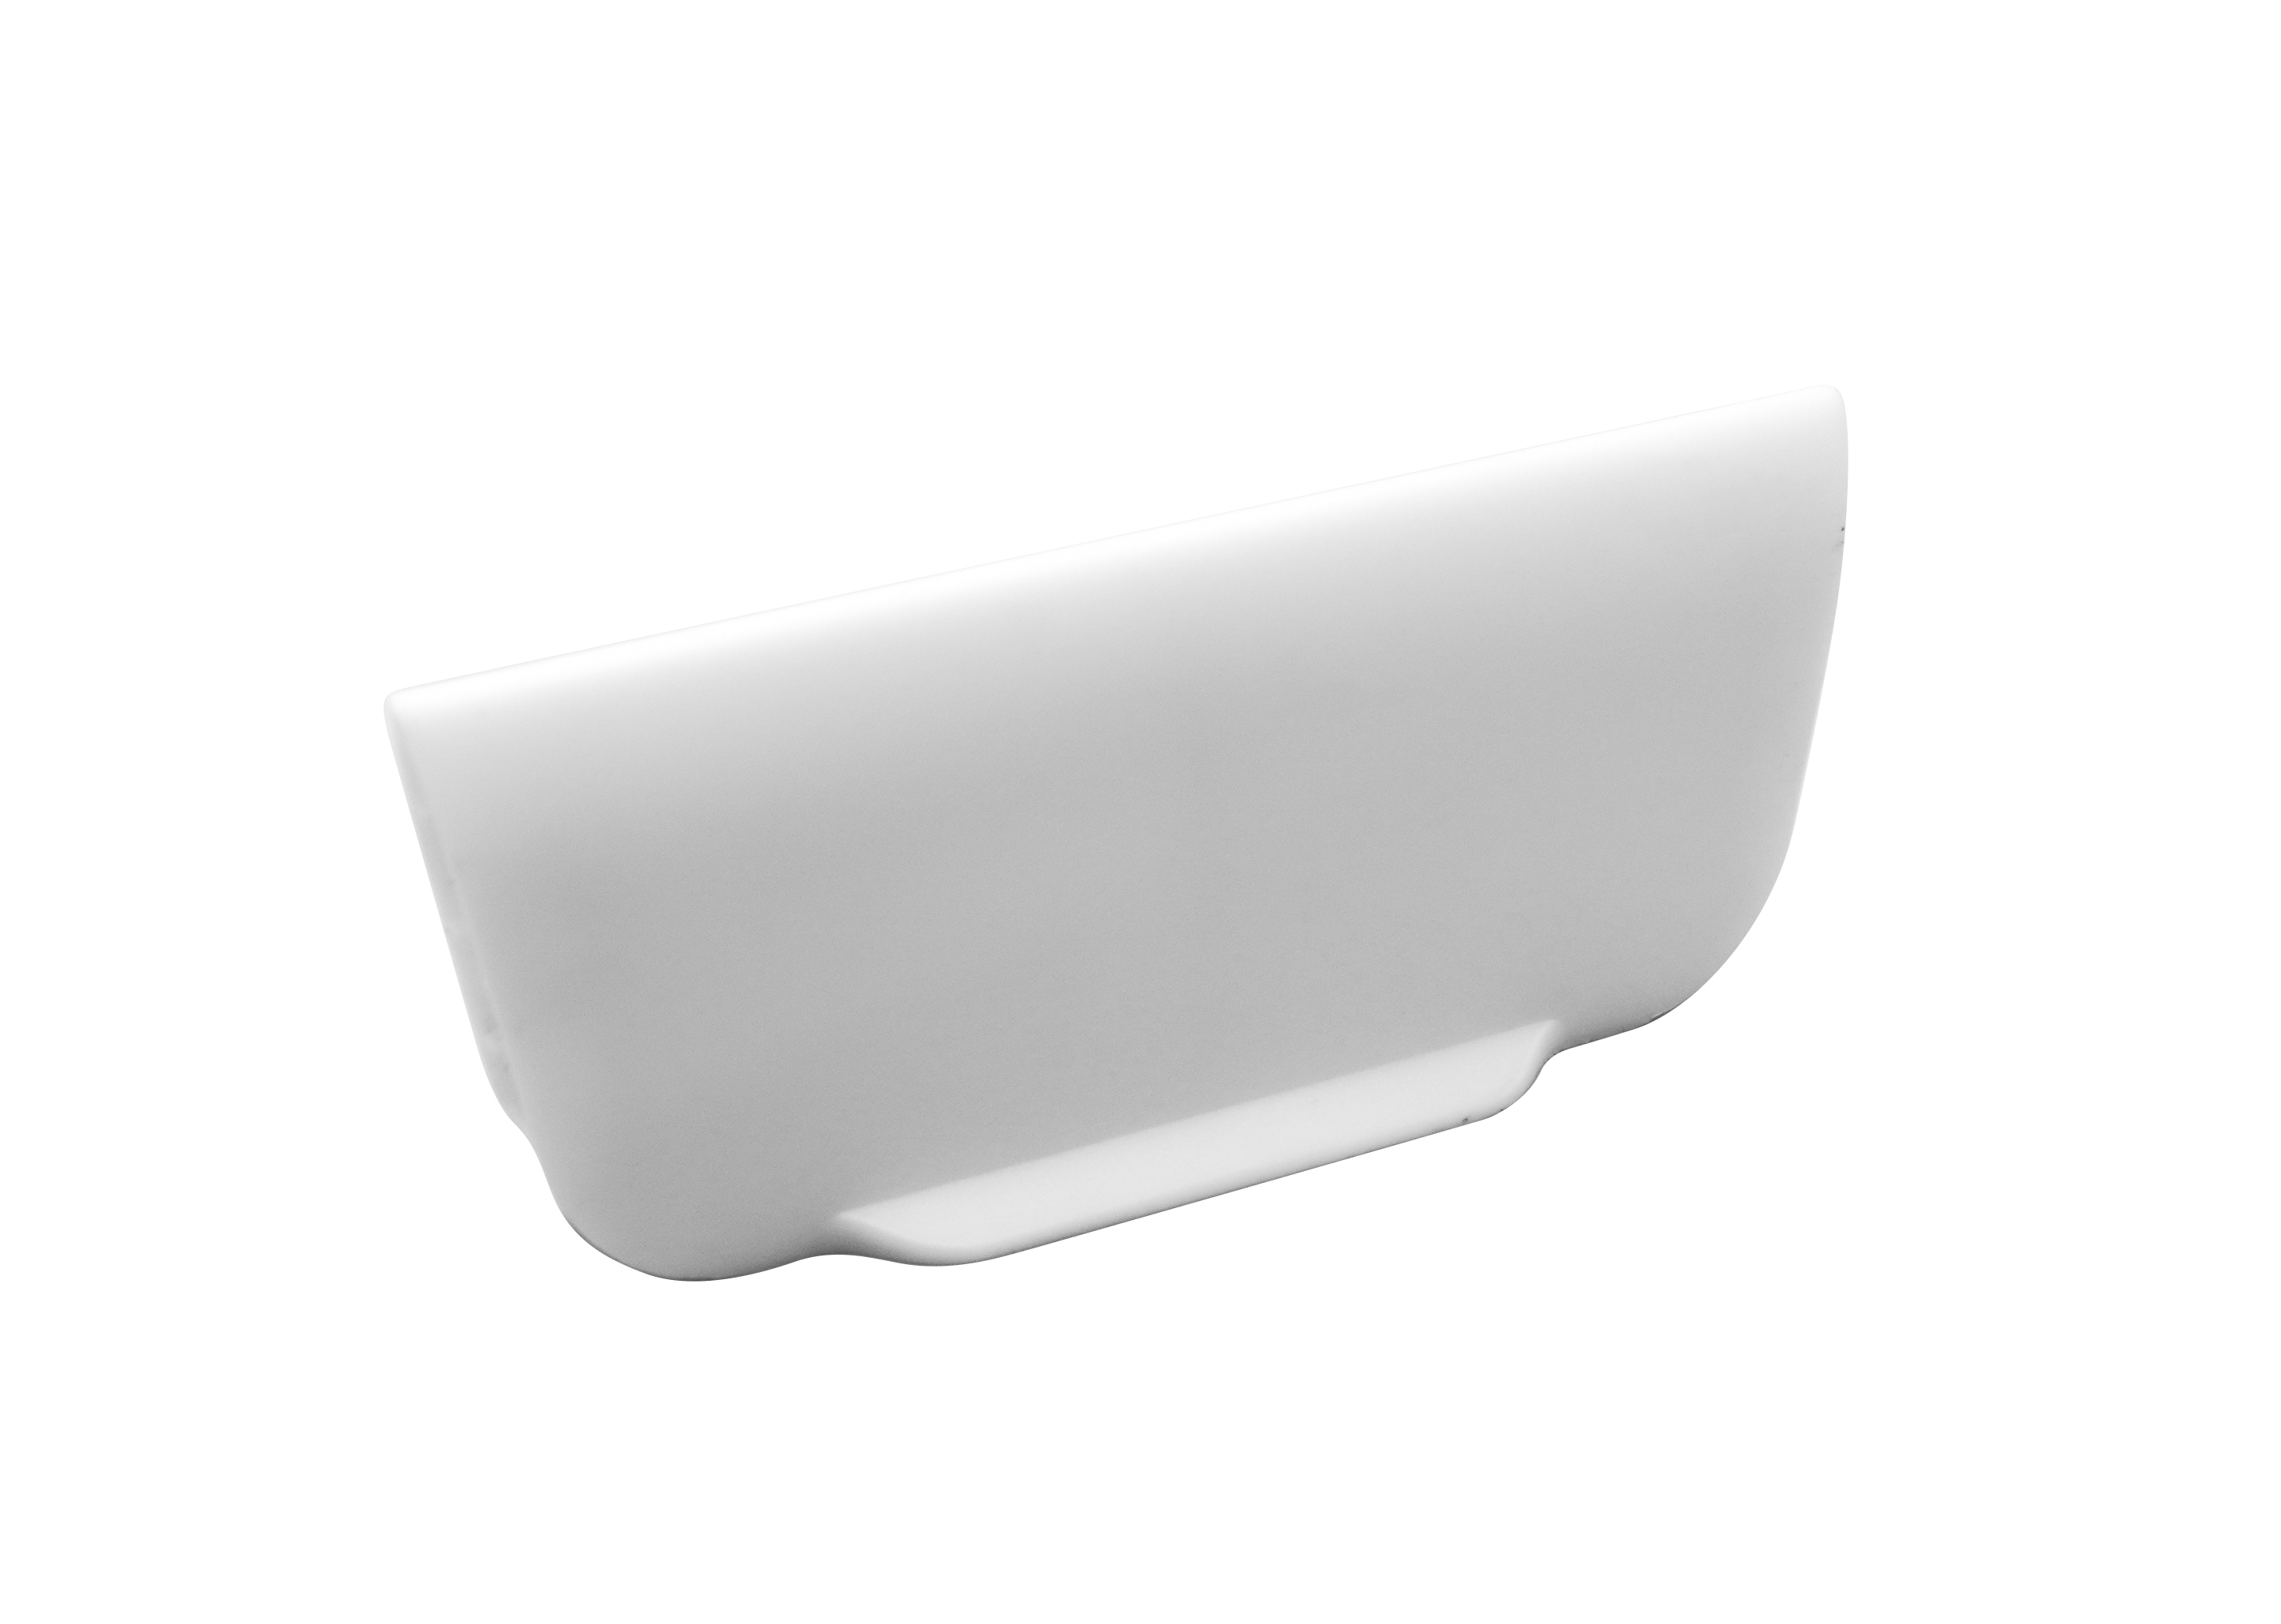 Cutlery tray divider_95x45_White